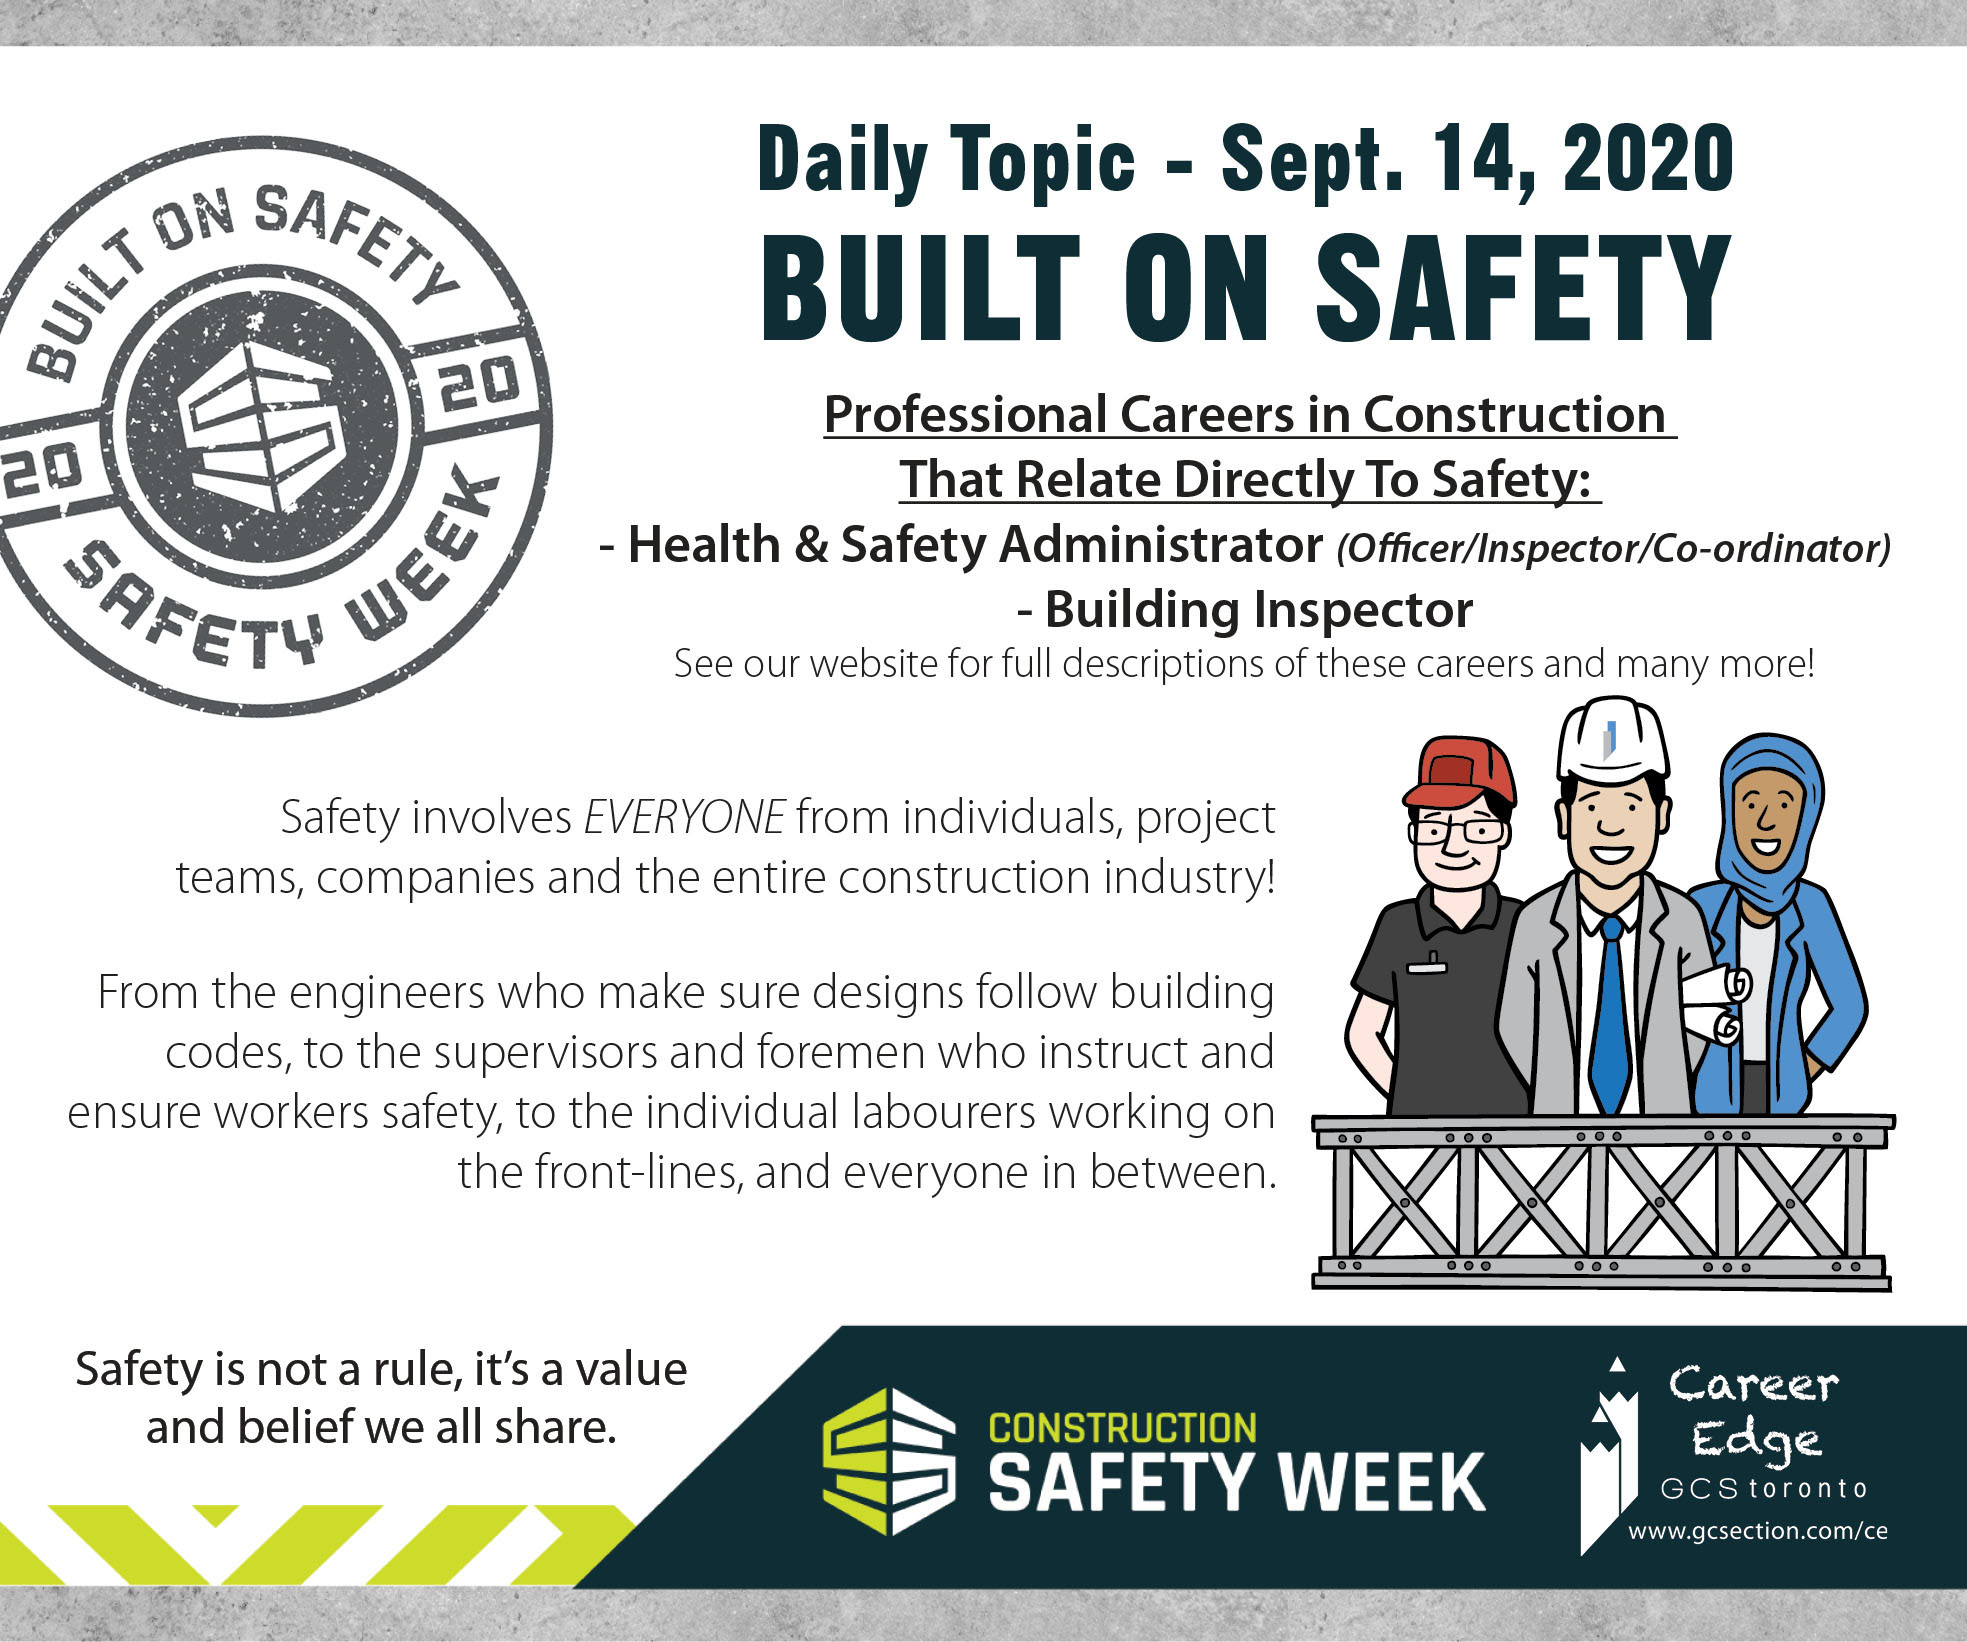 CONSTRUCTION SAFETY WEEK DAILY TOPIC DAY 1 GCAT